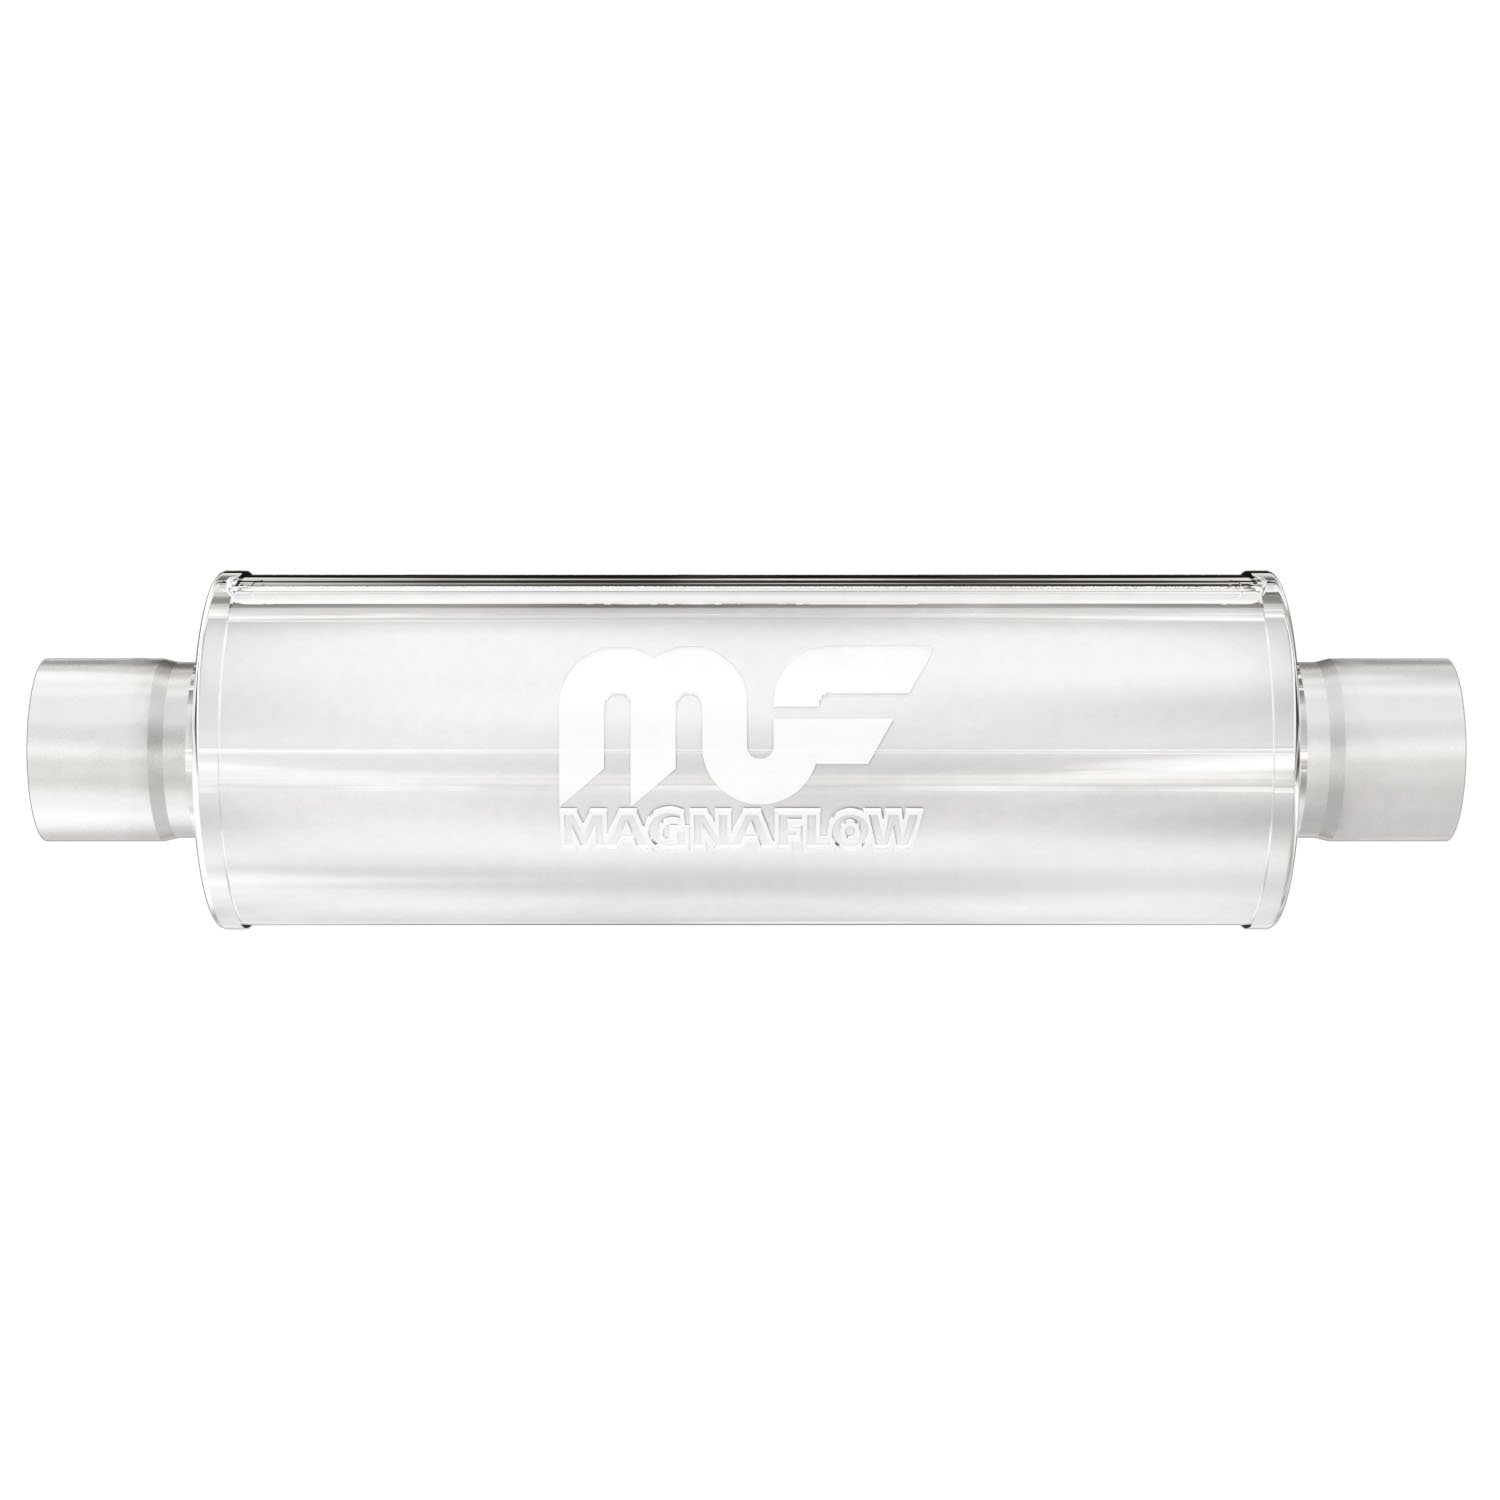 7" Round Muffler, Center In/Center Out: 3", Body Length: 14", Overall Length: 20", Core Size: 3" [Brushed Finish]